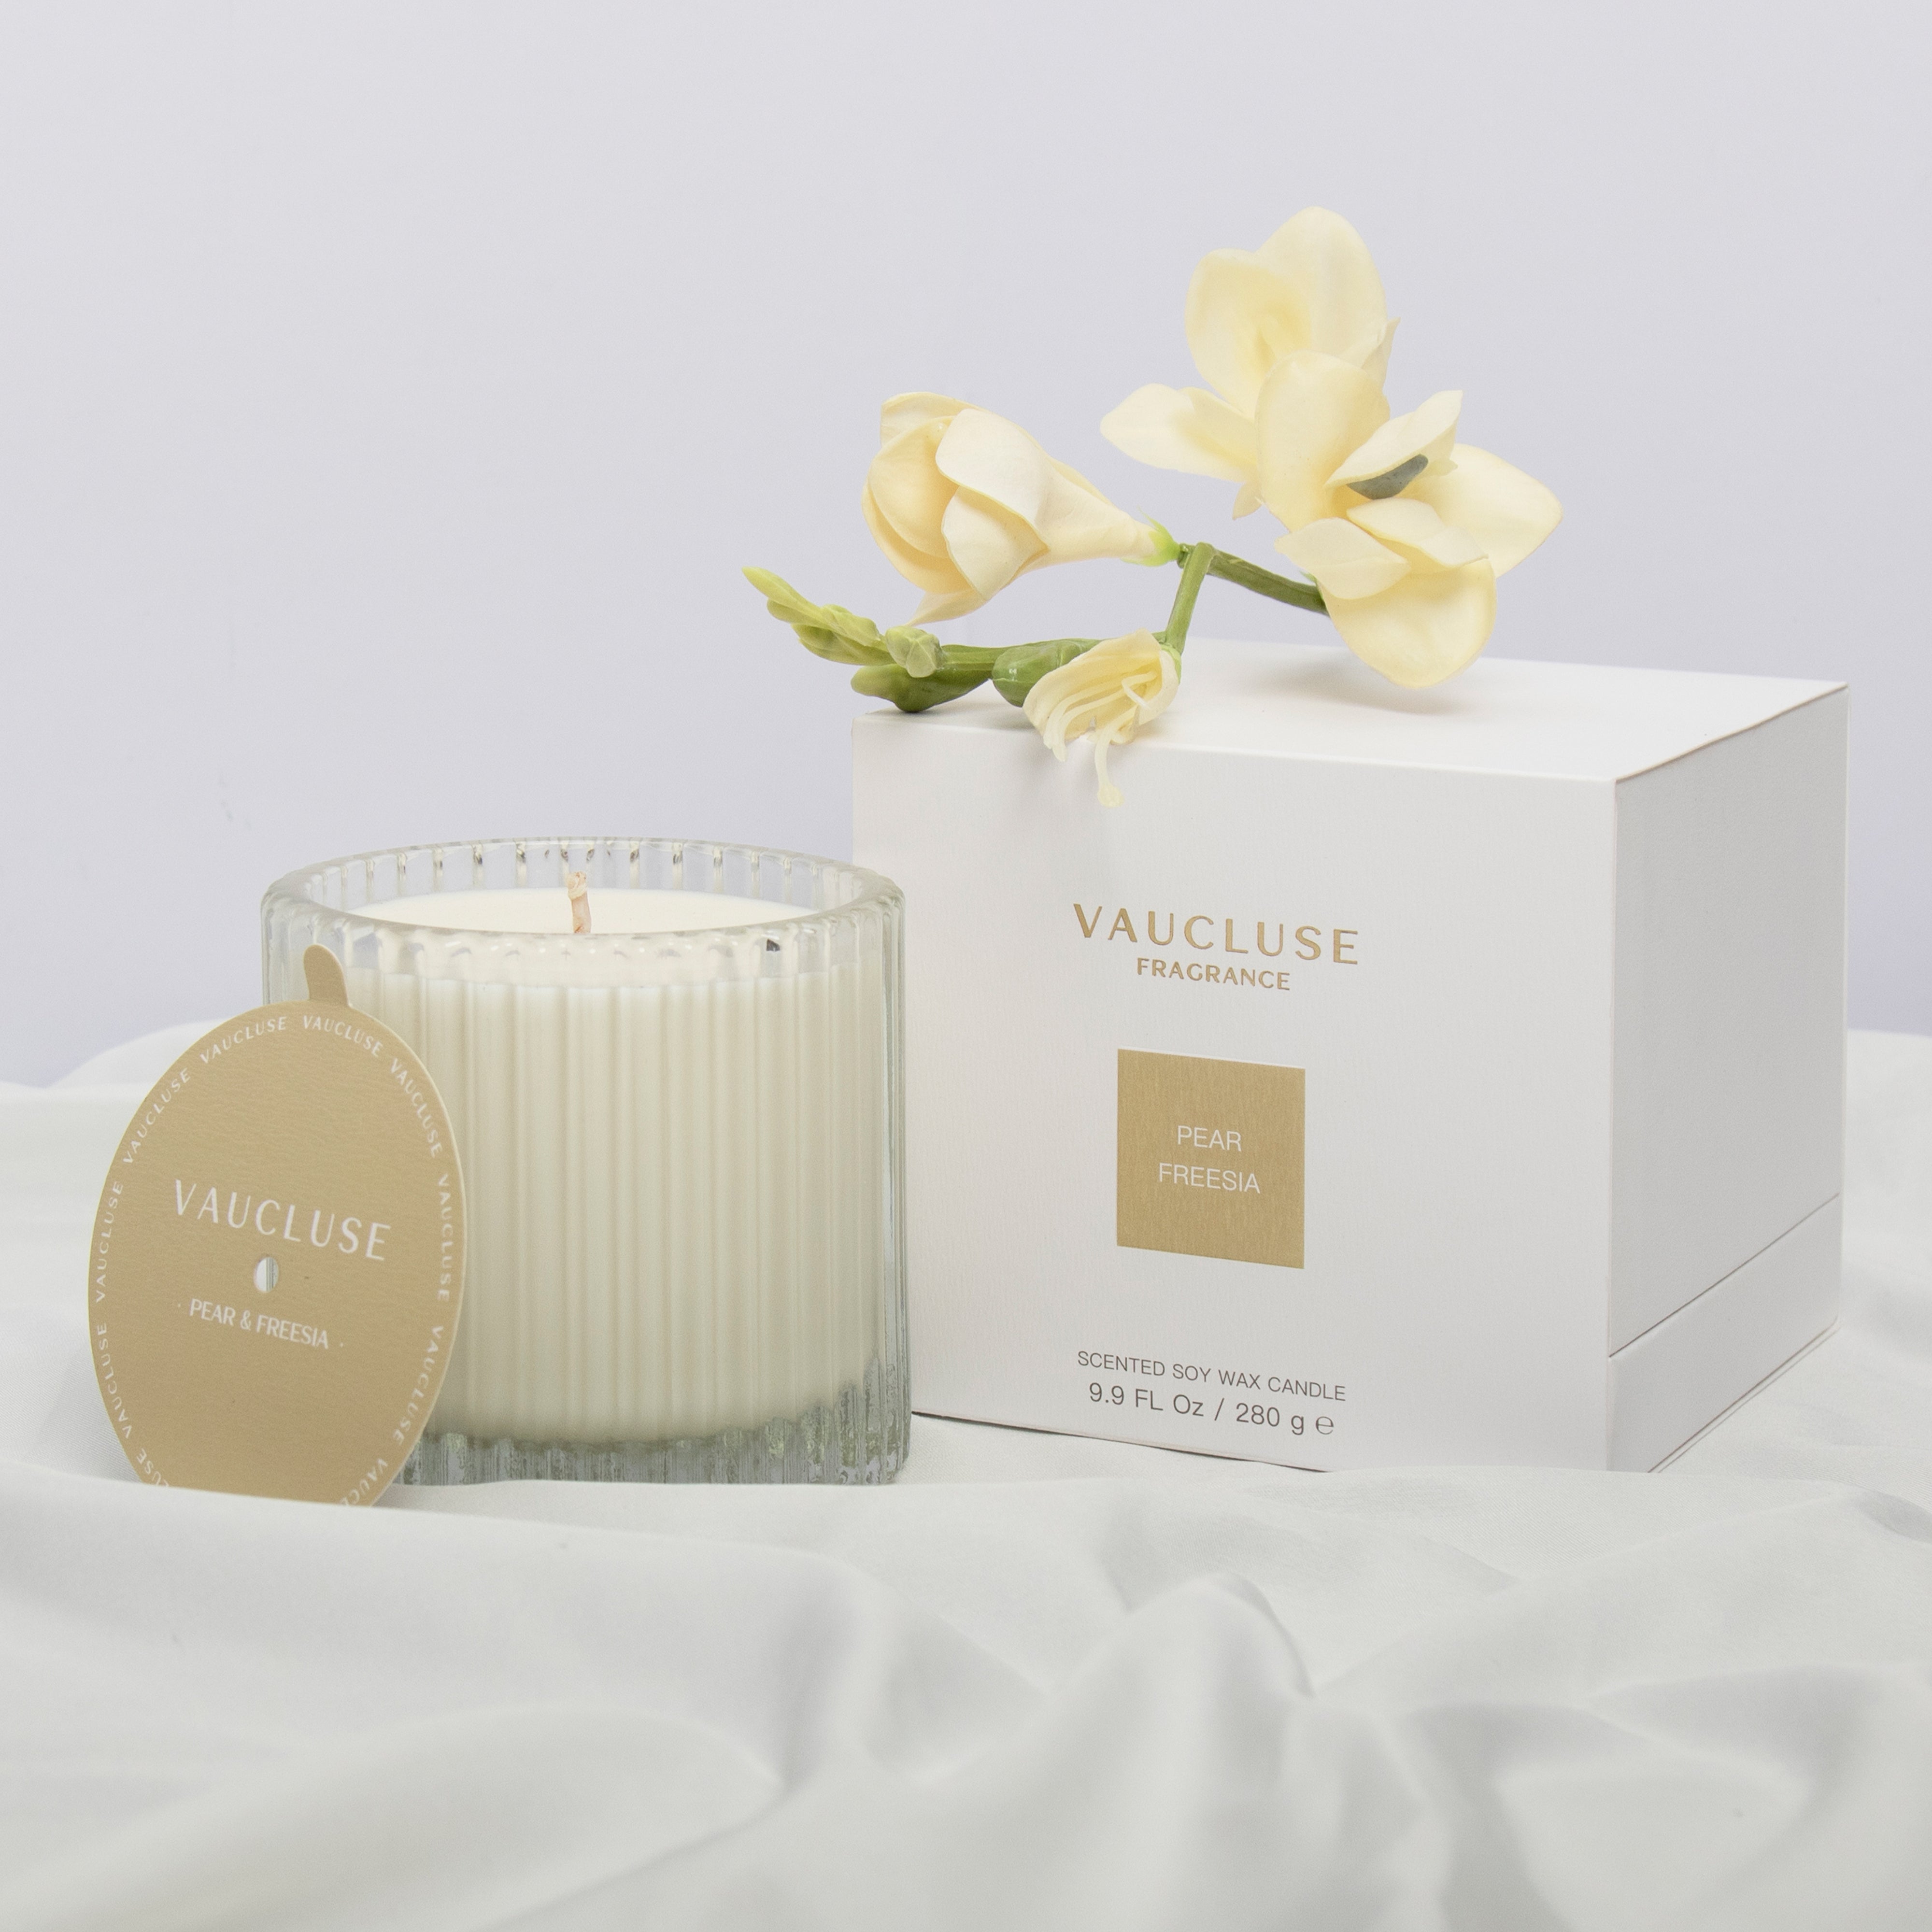 Pear & Freesia Scented Candle - VAUCLUSE